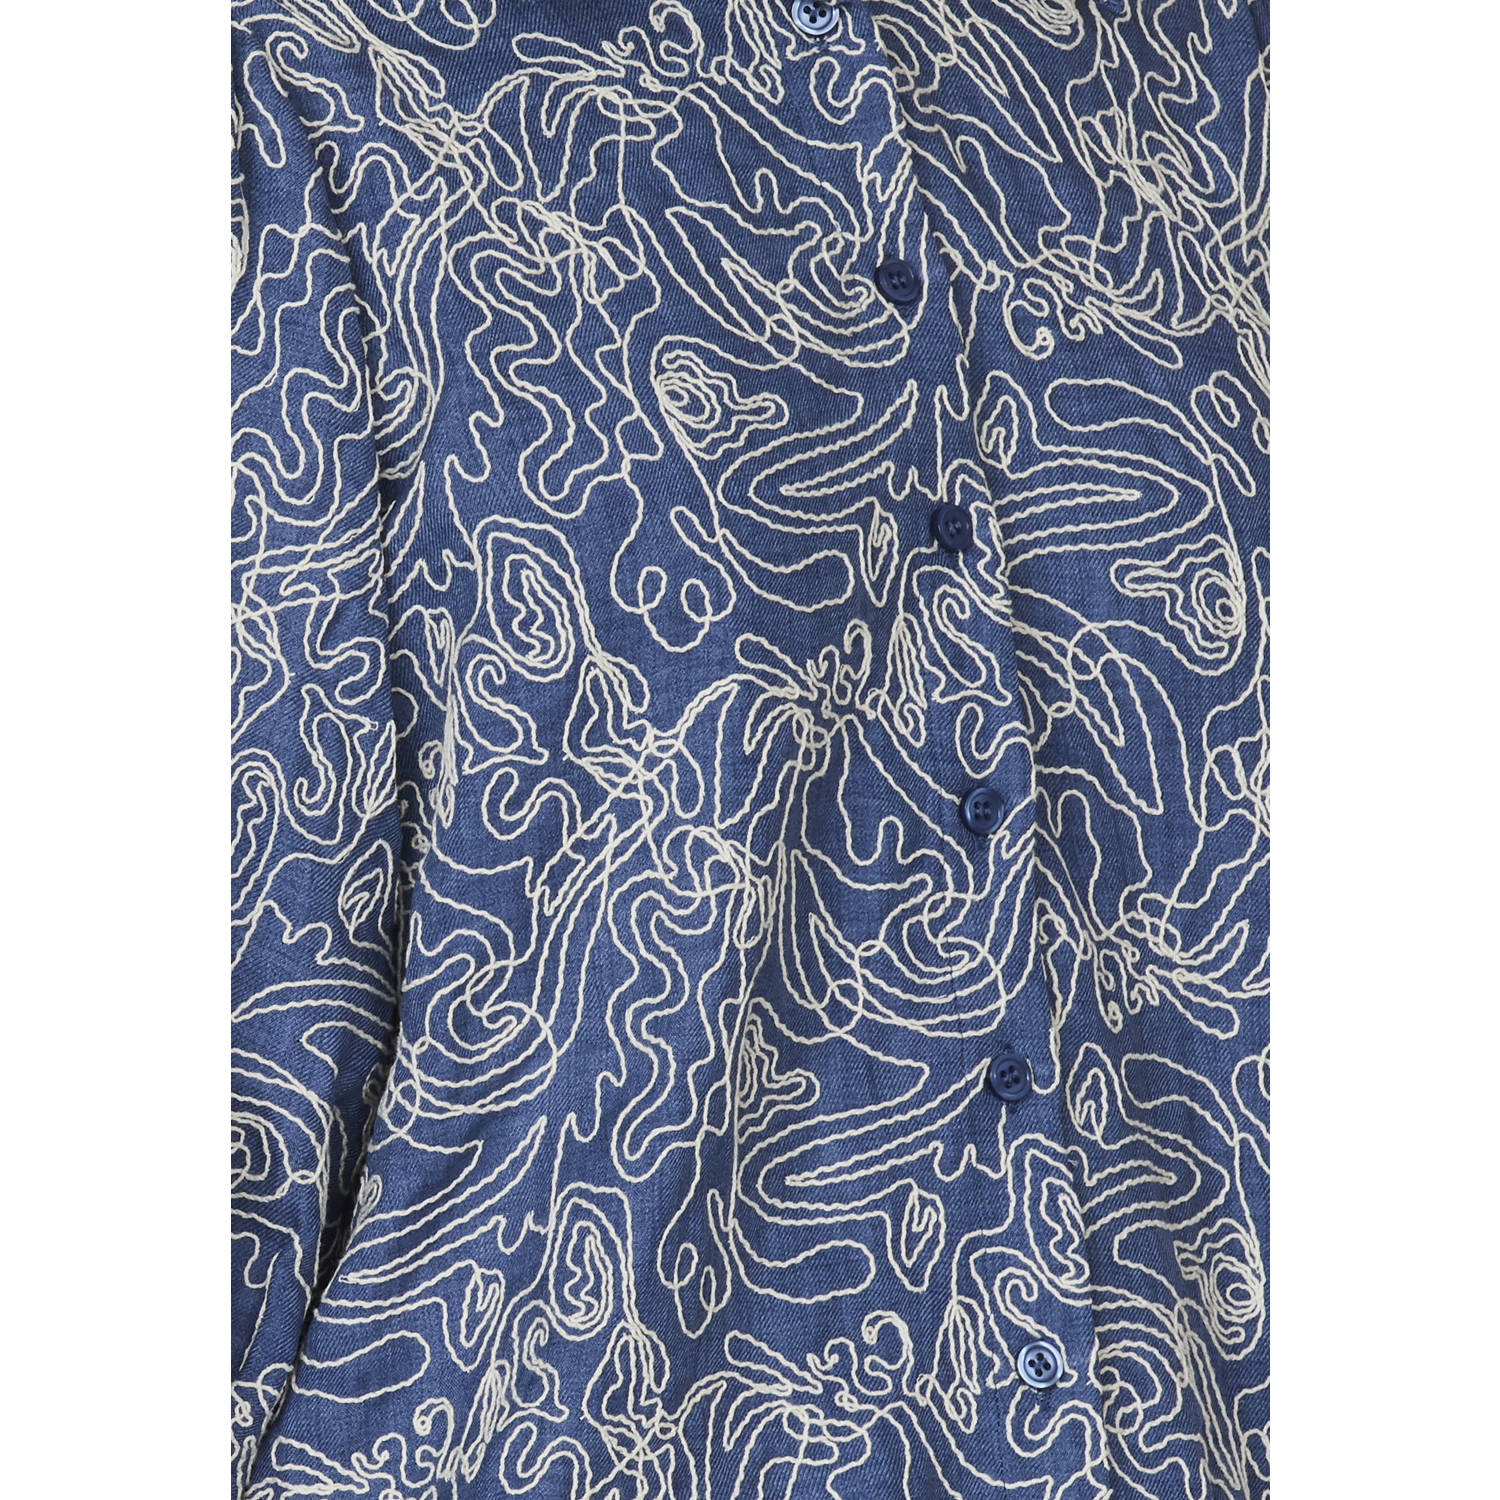 SisterS Point blouse NEWA blauw wit